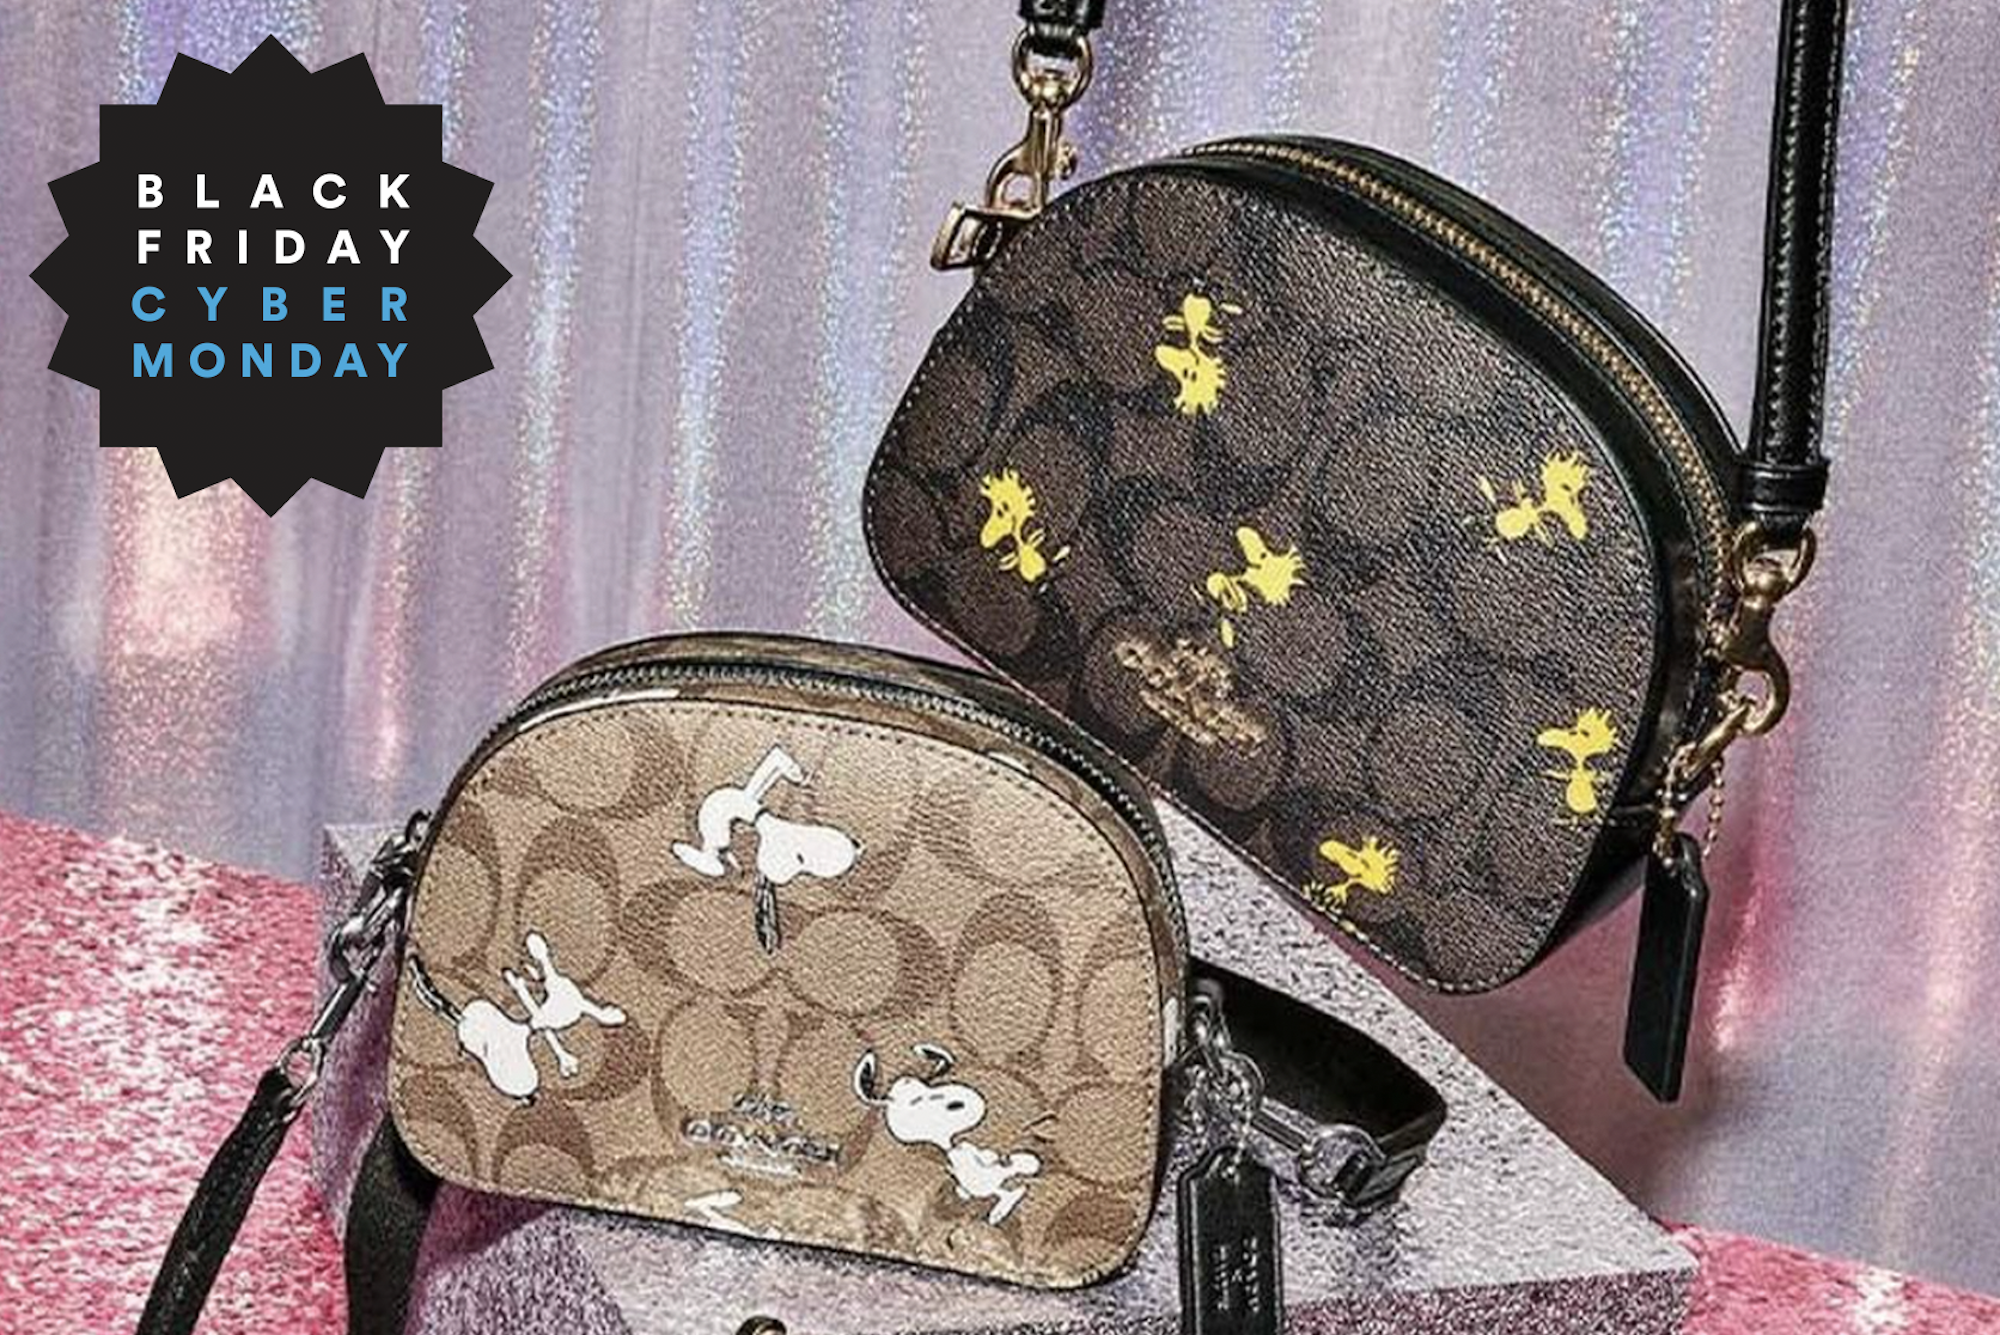 COACH® Outlet  Coach X Peanuts Mini Serena Crossbody With Woodstock